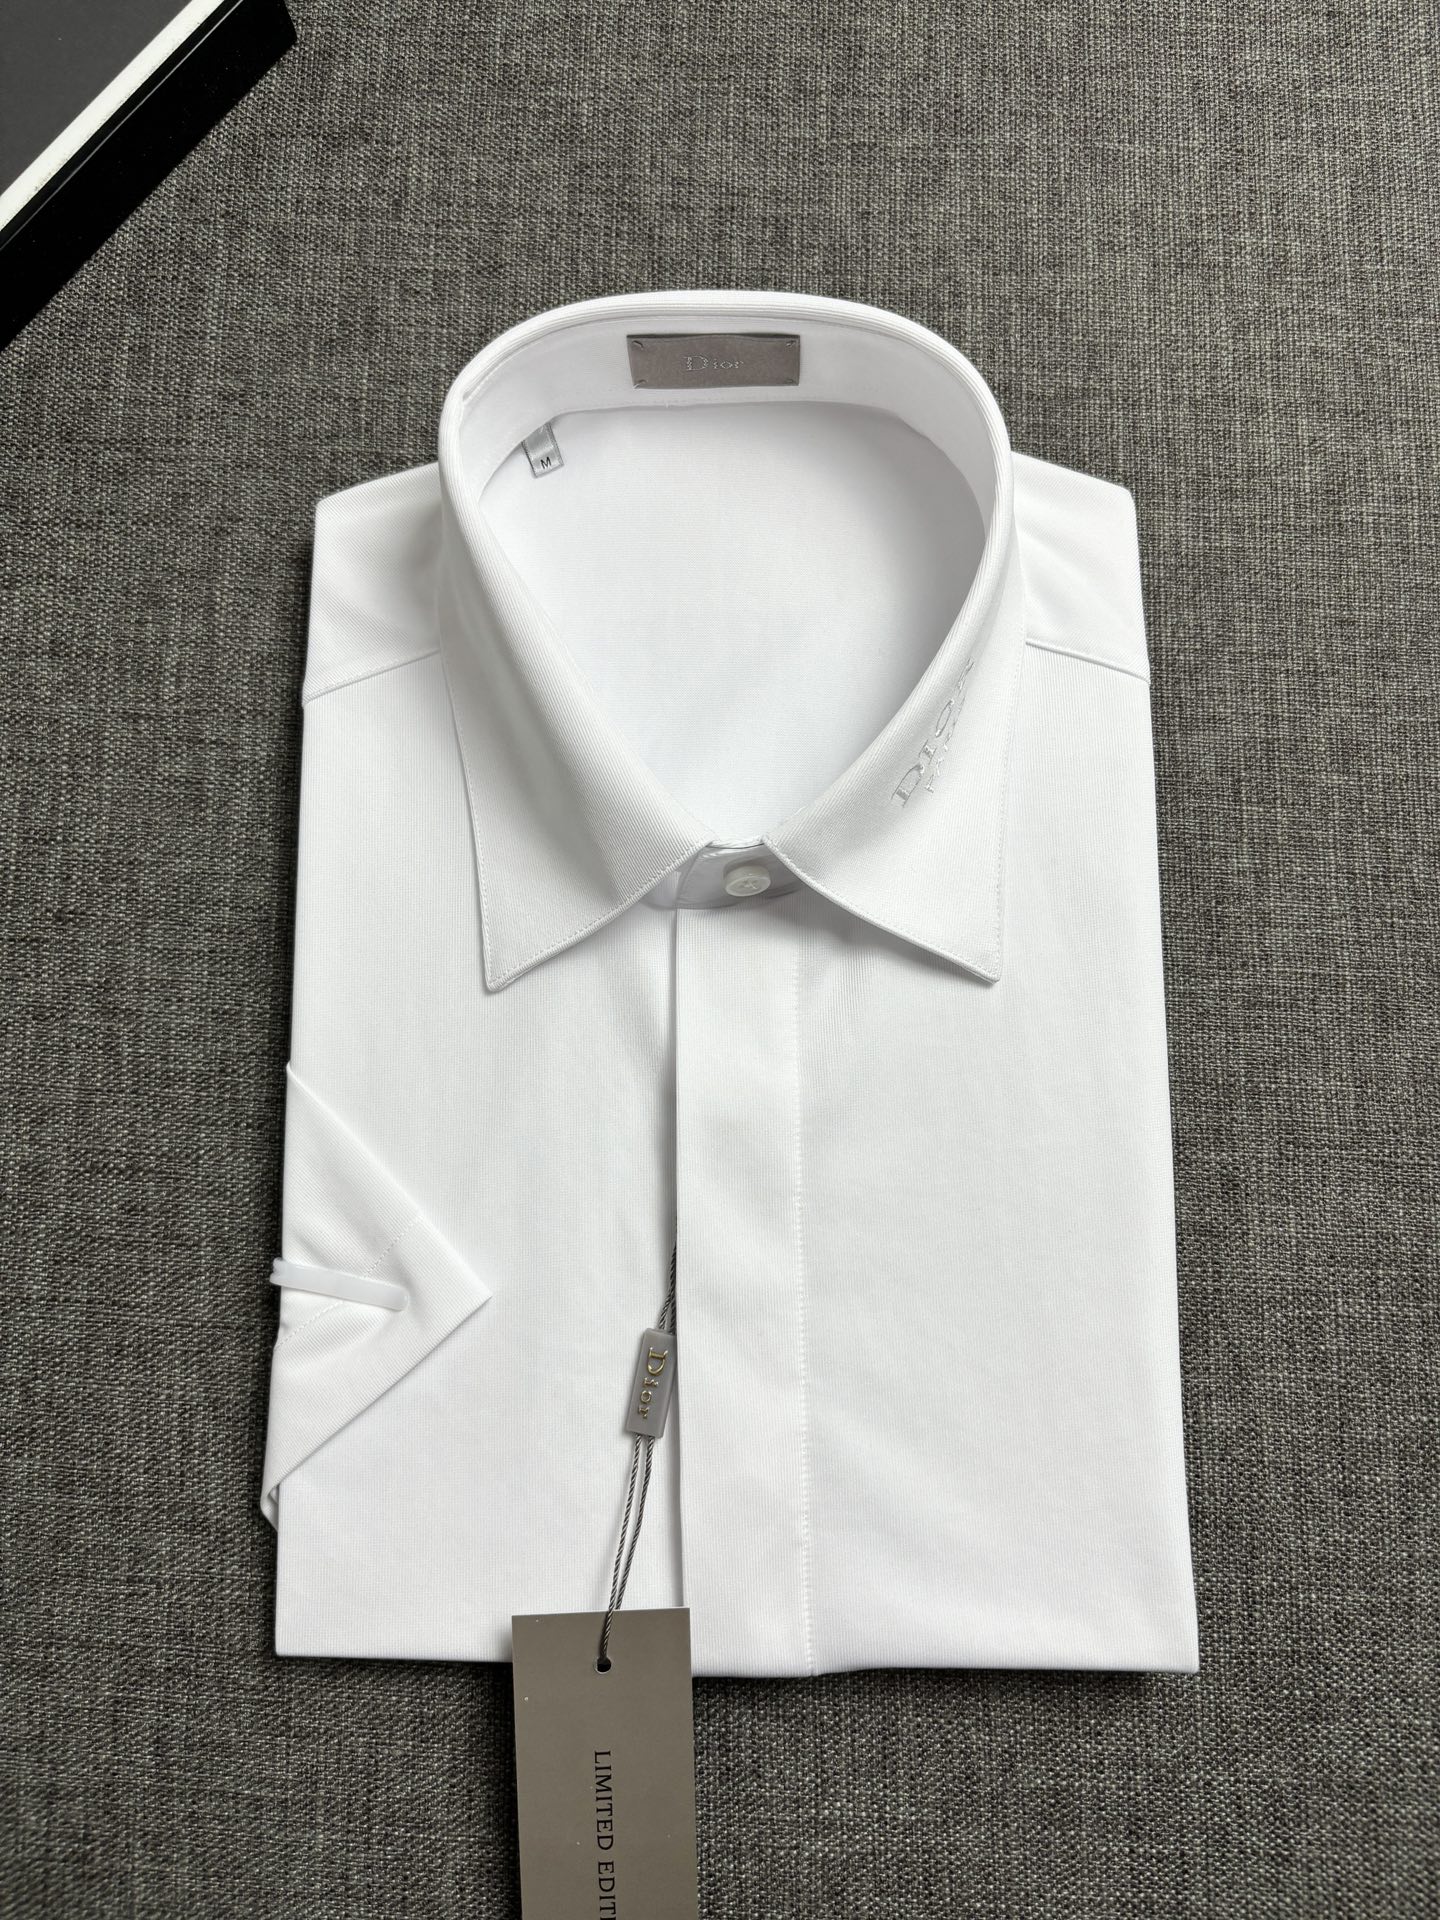 Dior Clothing Shirts & Blouses Embroidery Men Cotton Poplin Fabric Casual